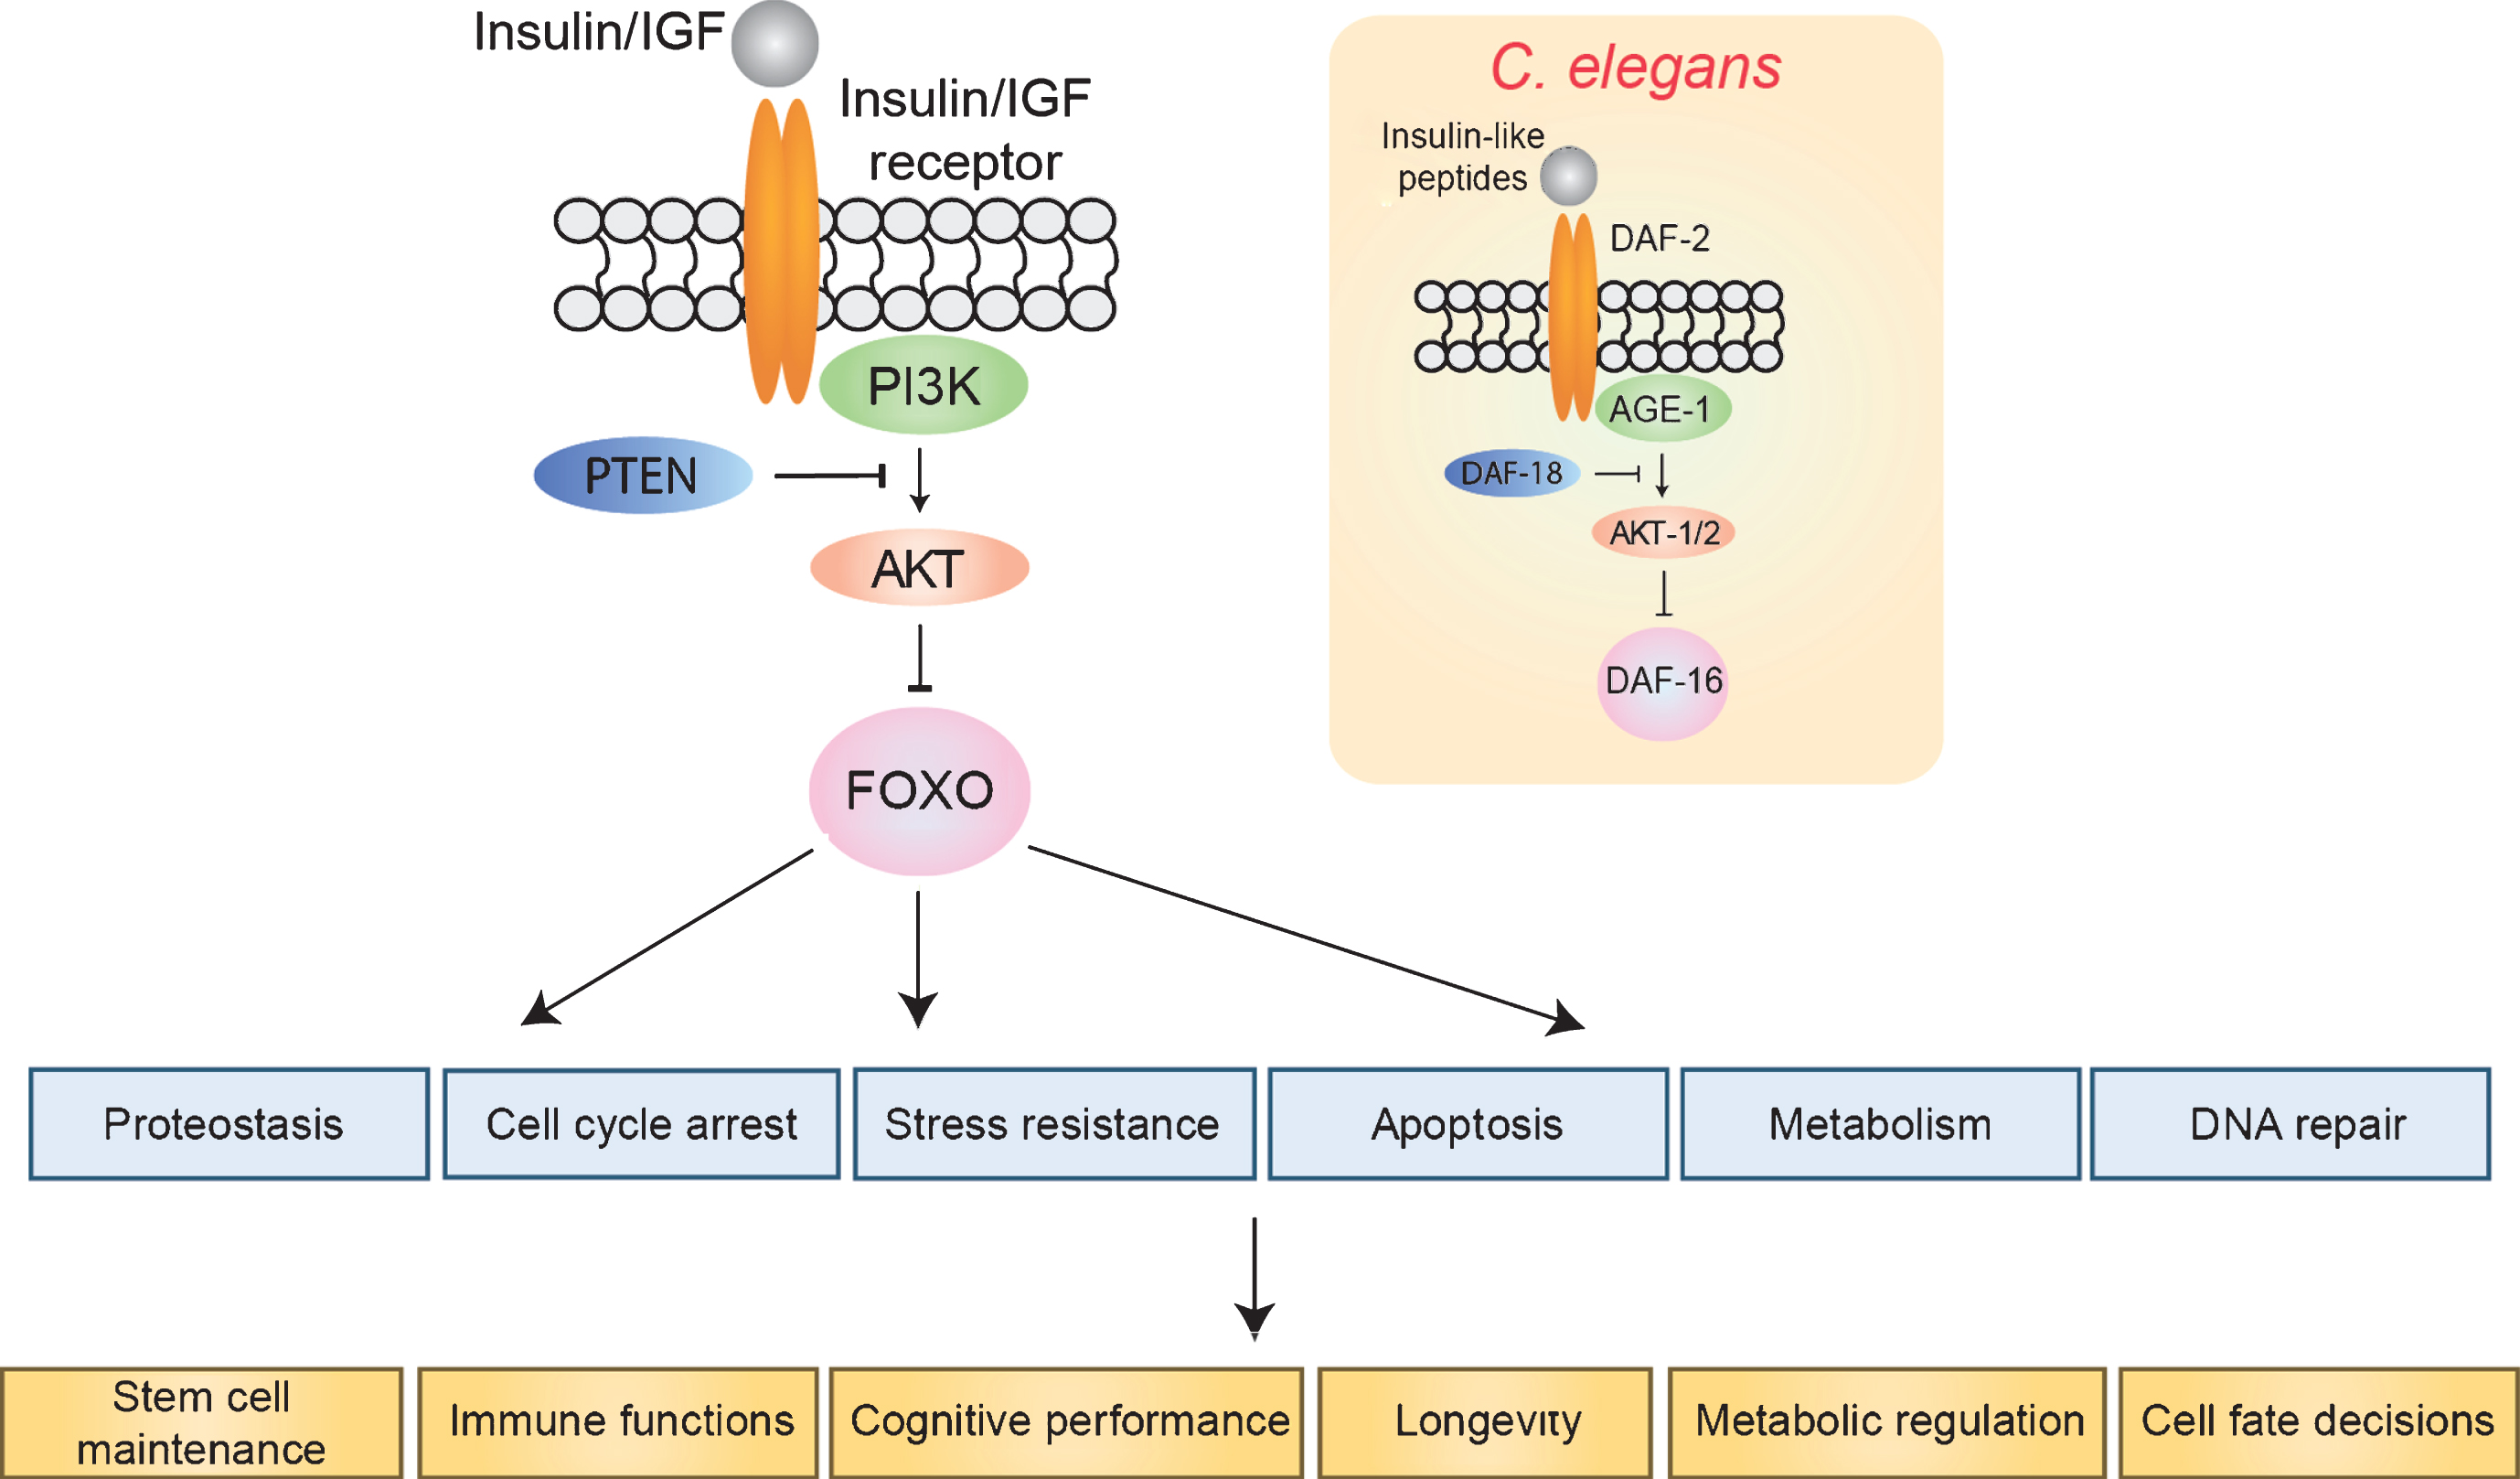 The insulin/IGF signaling pathway. FOXO transcription factors are inhibited by insulin/IGF signaling. In the absence of insulin/IGF binding, FOXOs regulate a number of cellular processes (blue), which in turn affect tissue homeostasis and organismal longevity. Inset shows the orthologous pathway in C. elegans.